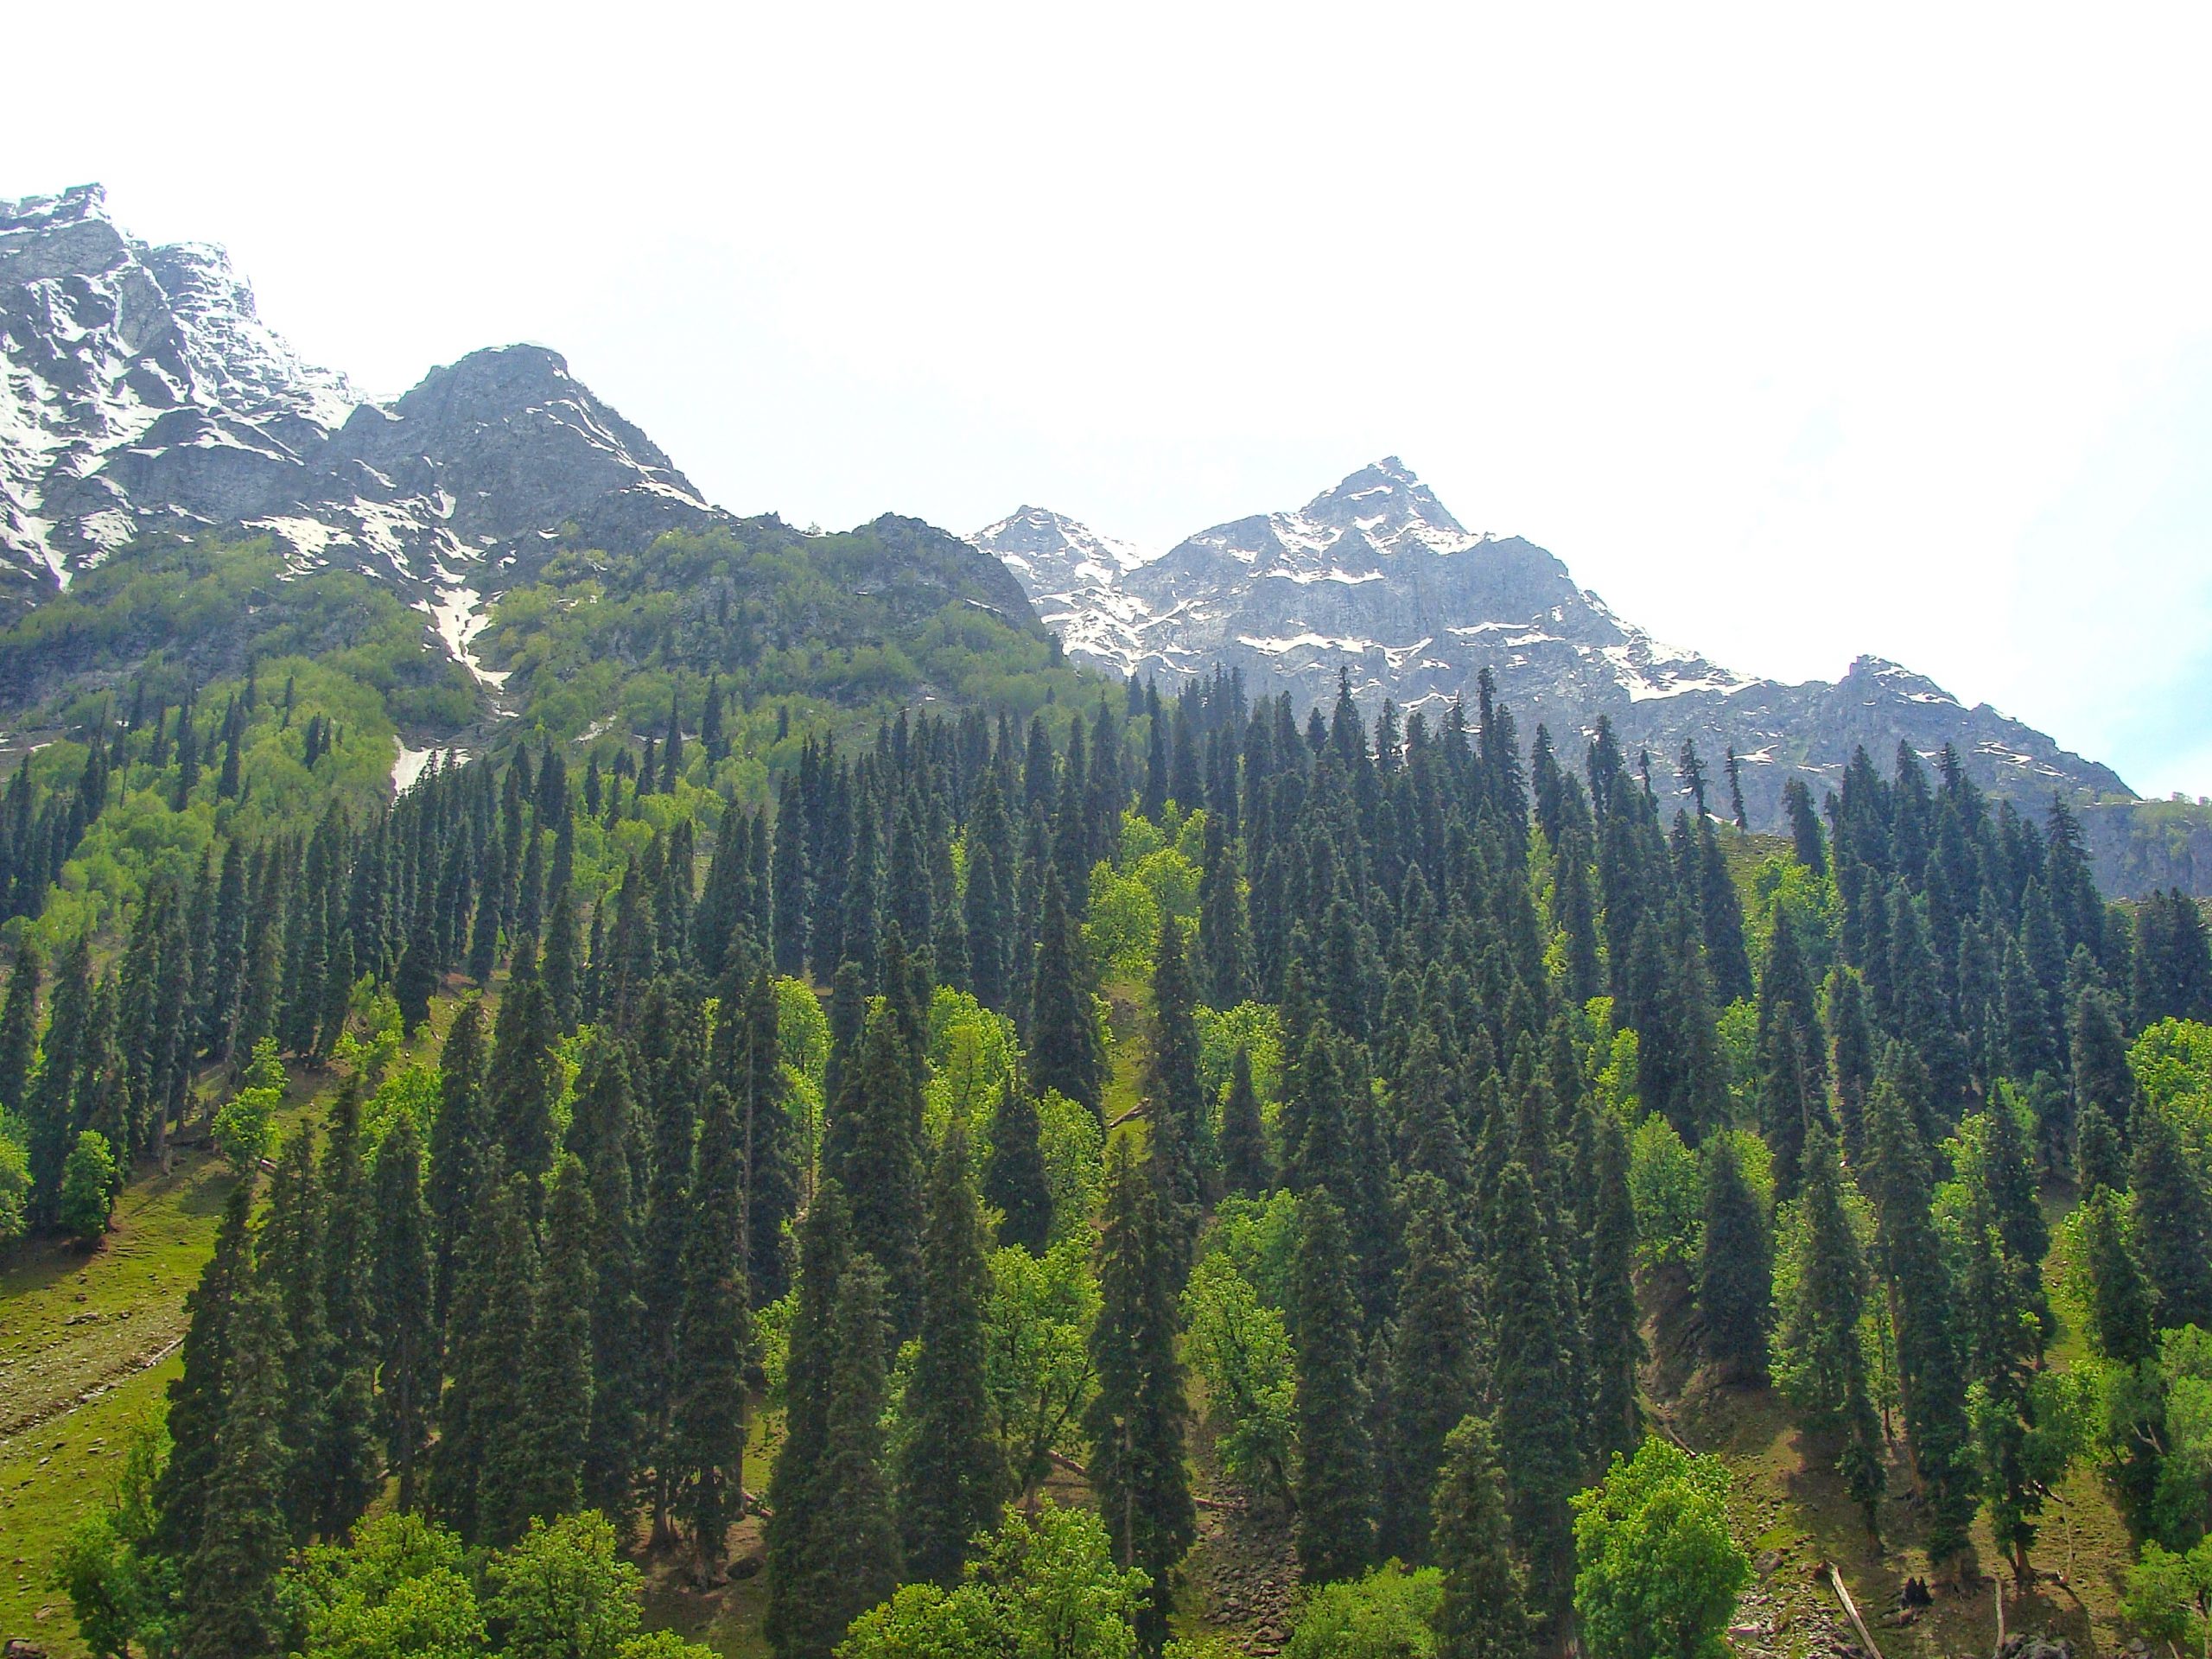 Pine Forest in the Himalayas